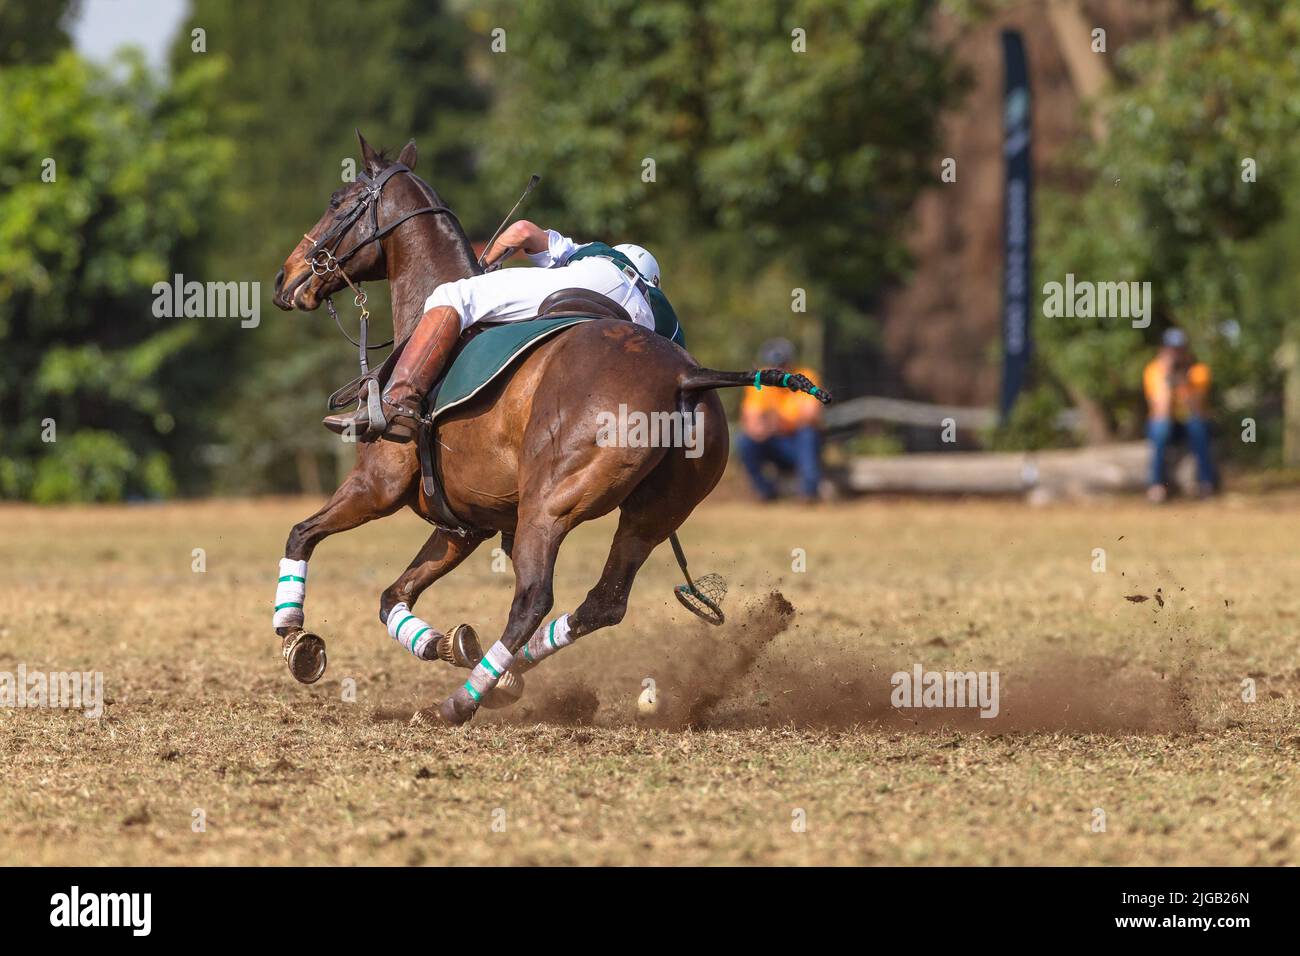 Player horse pony rider unrecognizable scoops ball with racket off the ground action play at polo-cross game. Stock Photo